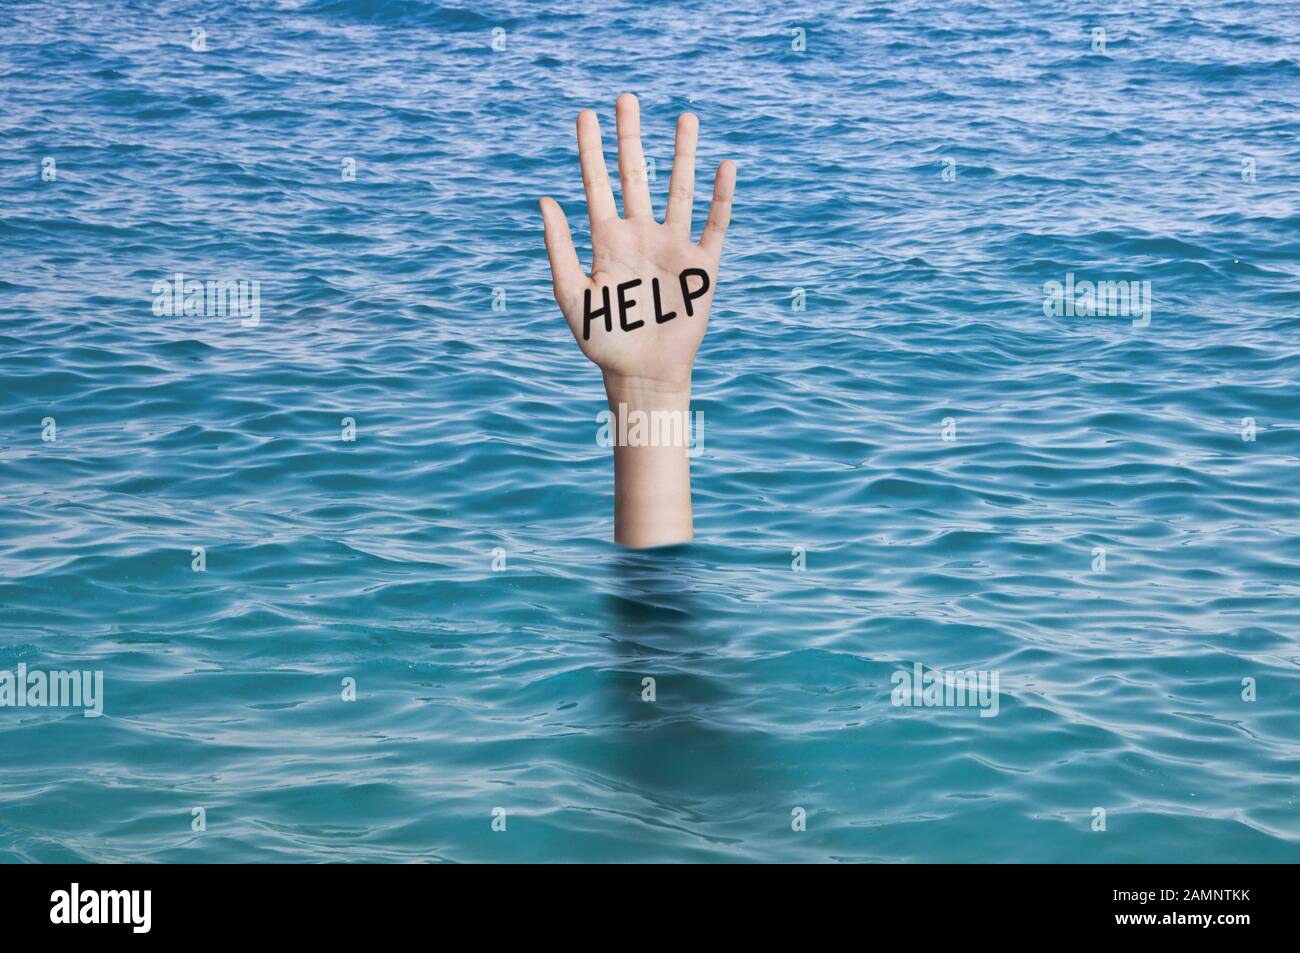 Word help written on the palm of a sinking hand in ocean's water. Drowning person Emergency, failure and help concept Stock Photo